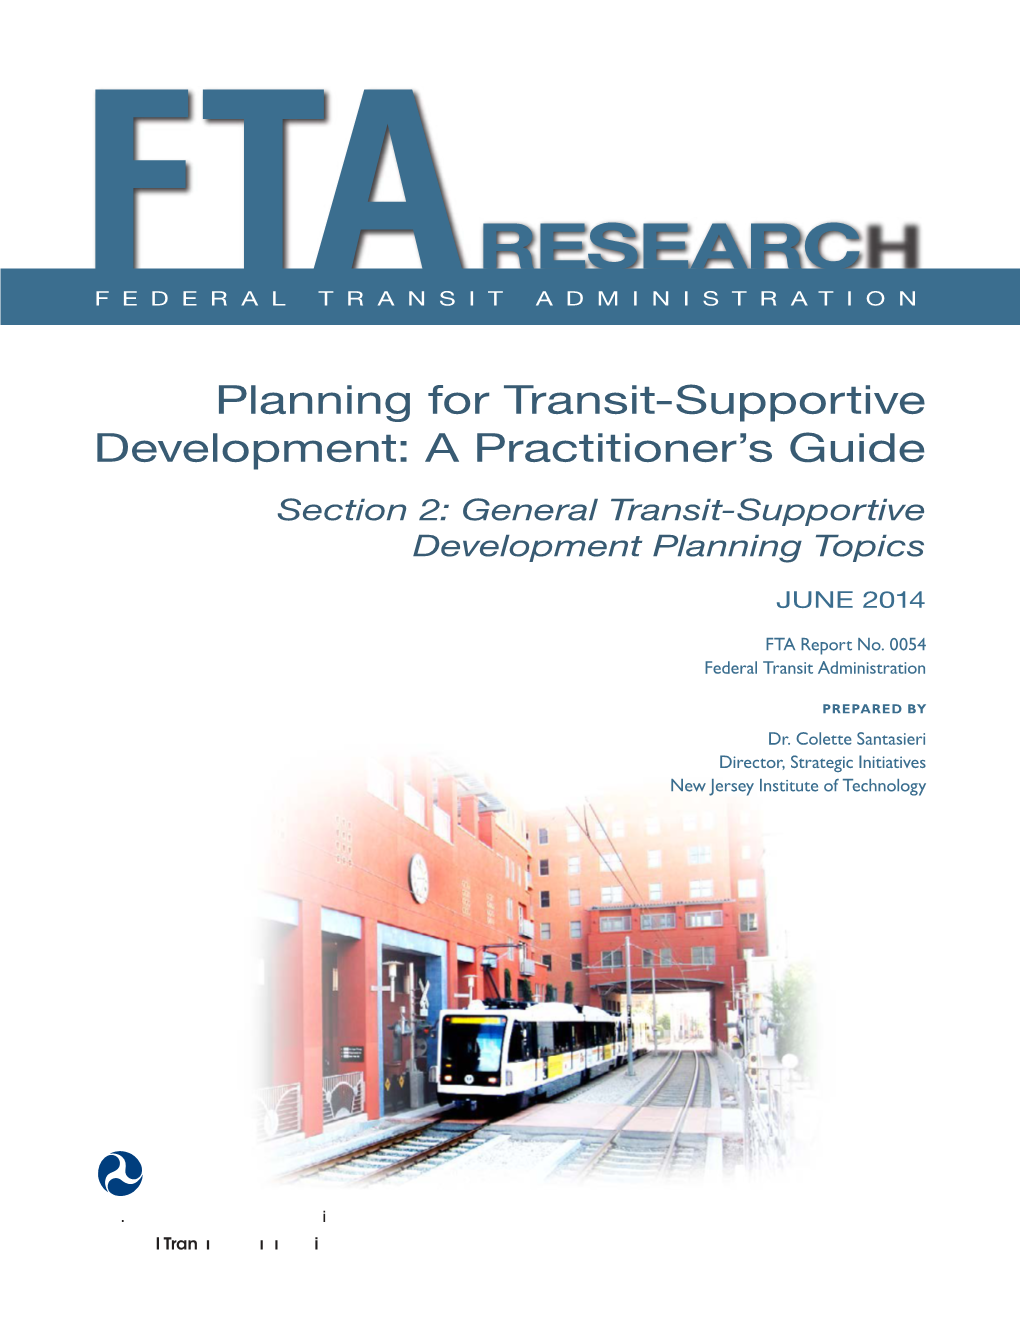 Planning for Transit-Supportivedevelopment: A